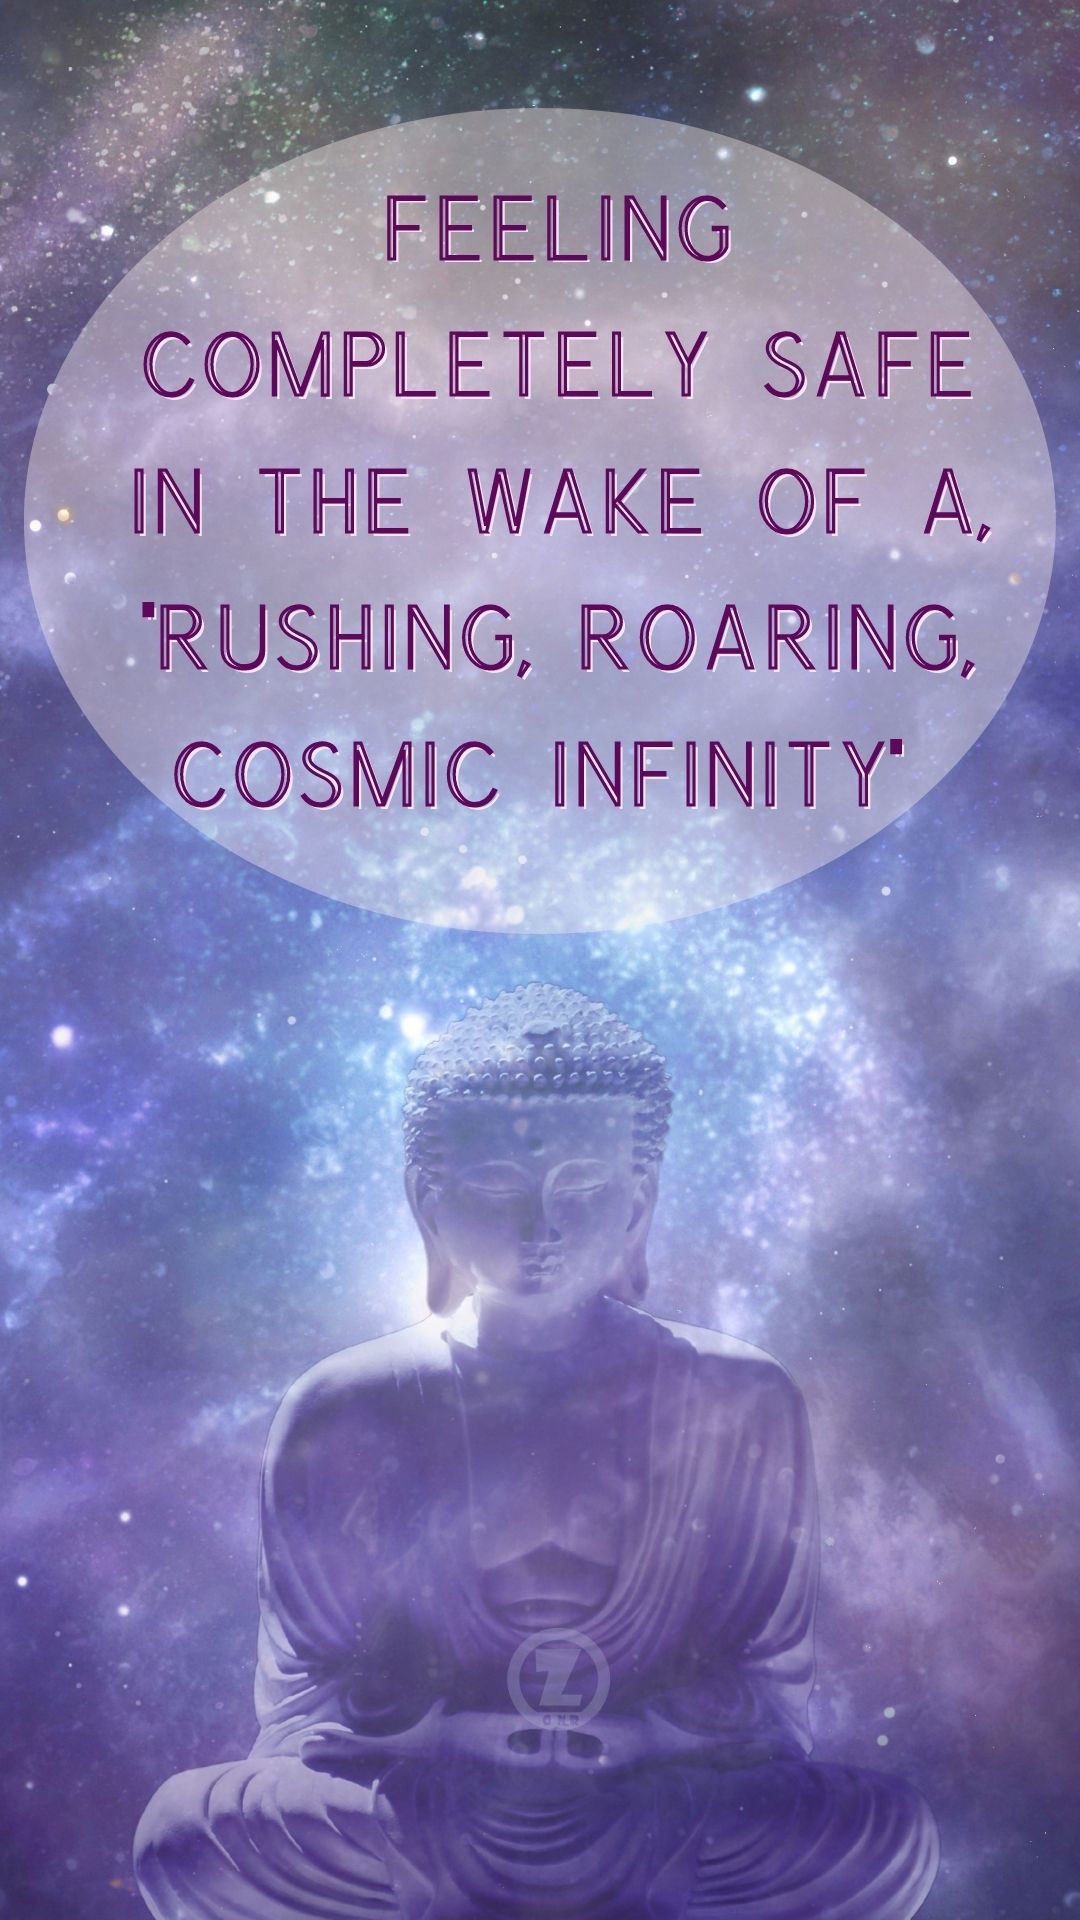 You are currently viewing Feeling Completely Safe in the Wake of a, “Rushing, Roaring, Cosmic Infinity” – Step 2